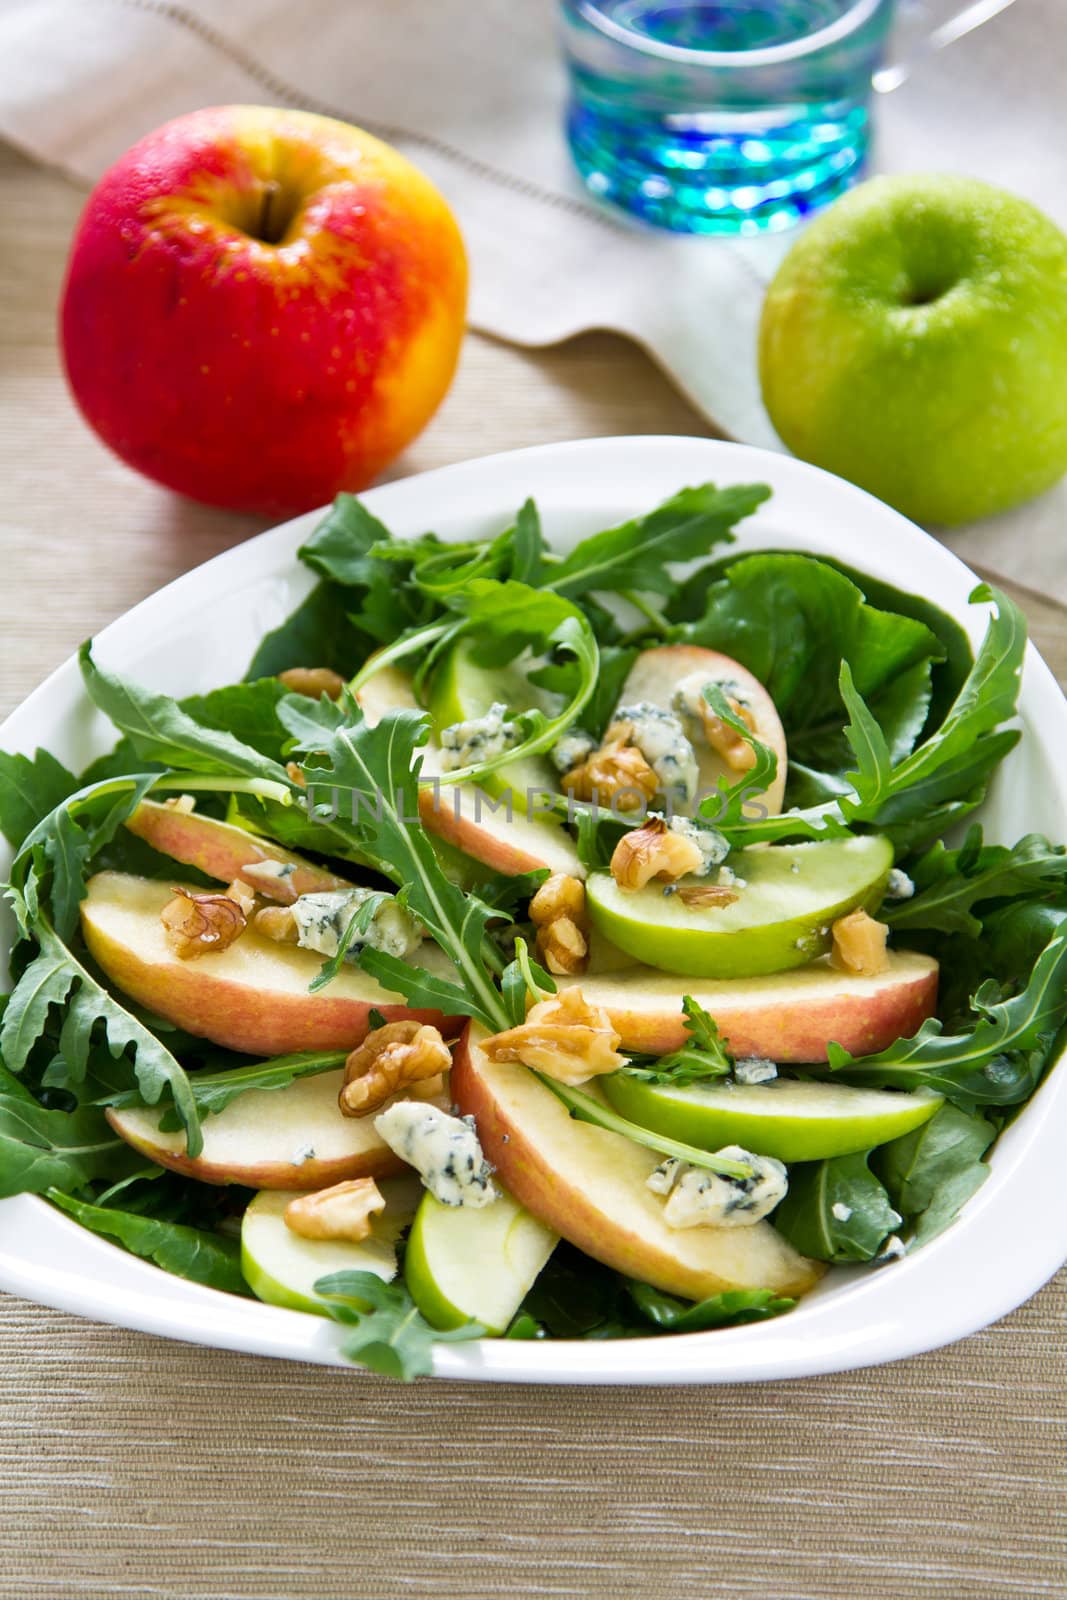 Apple with Walnut and Blue cheese salad by vanillaechoes